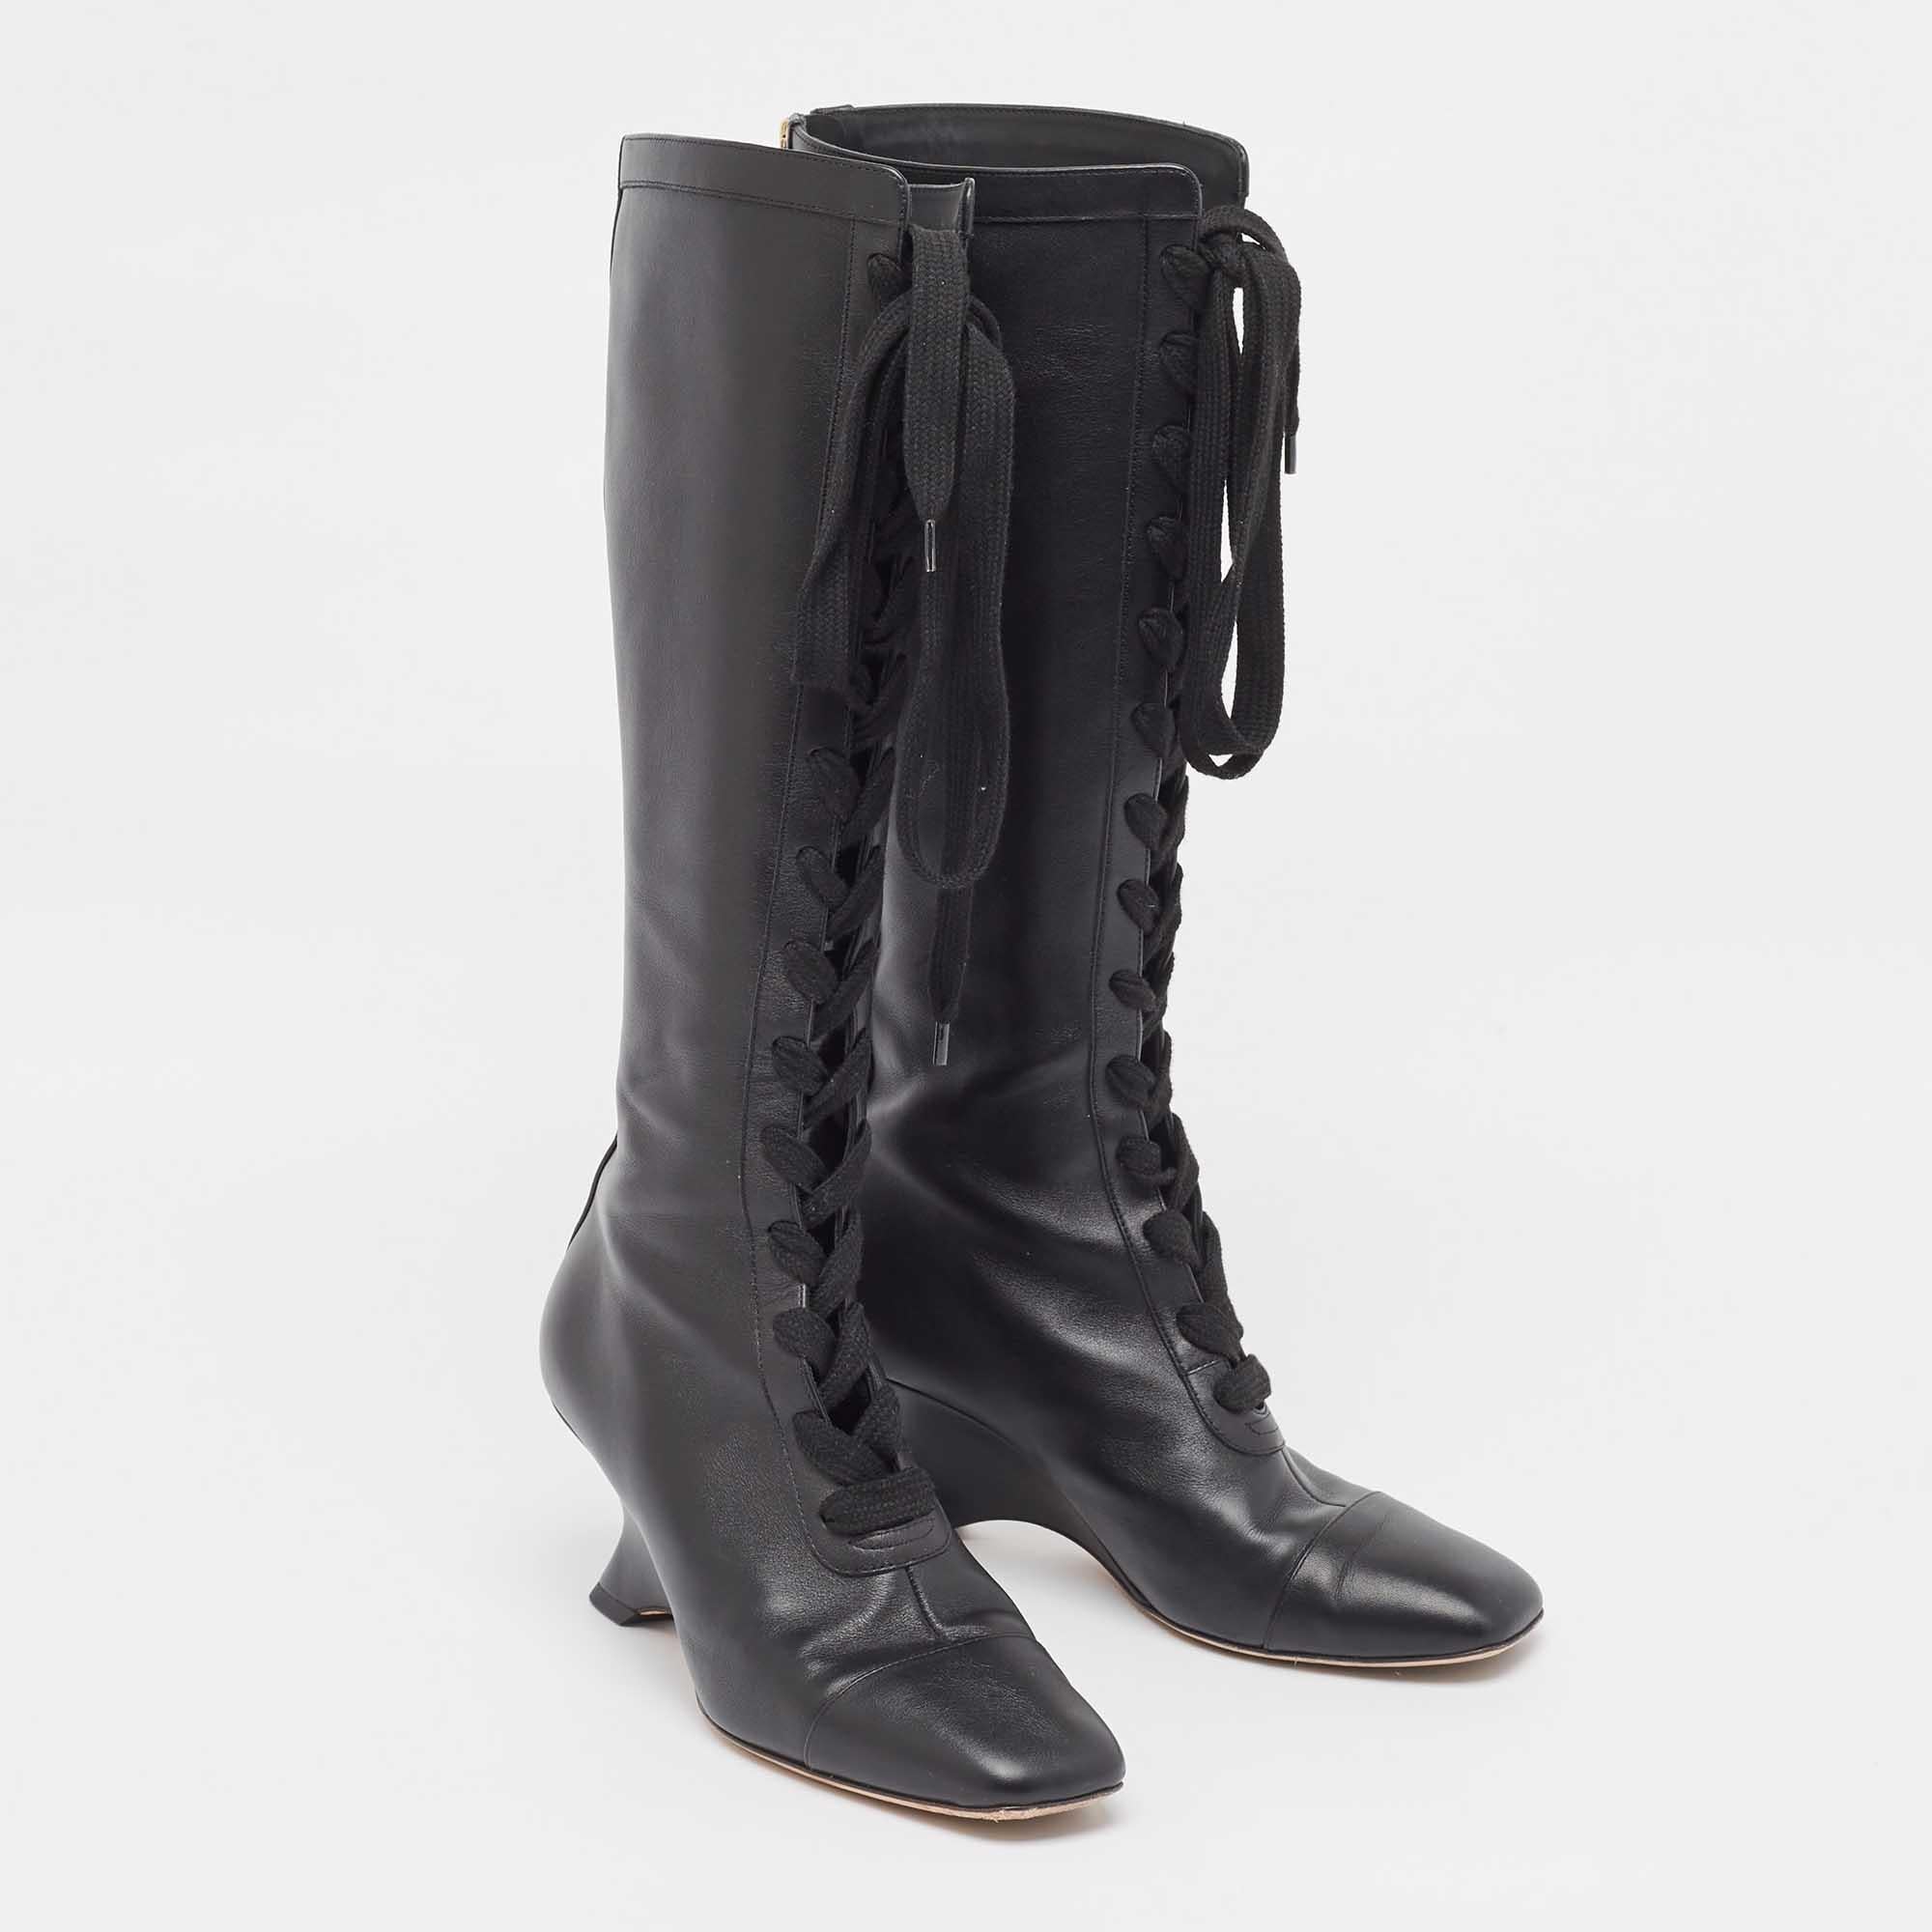 Dior Black Leather Naughtily-D Wedge Boots Size 39 In Good Condition For Sale In Dubai, Al Qouz 2